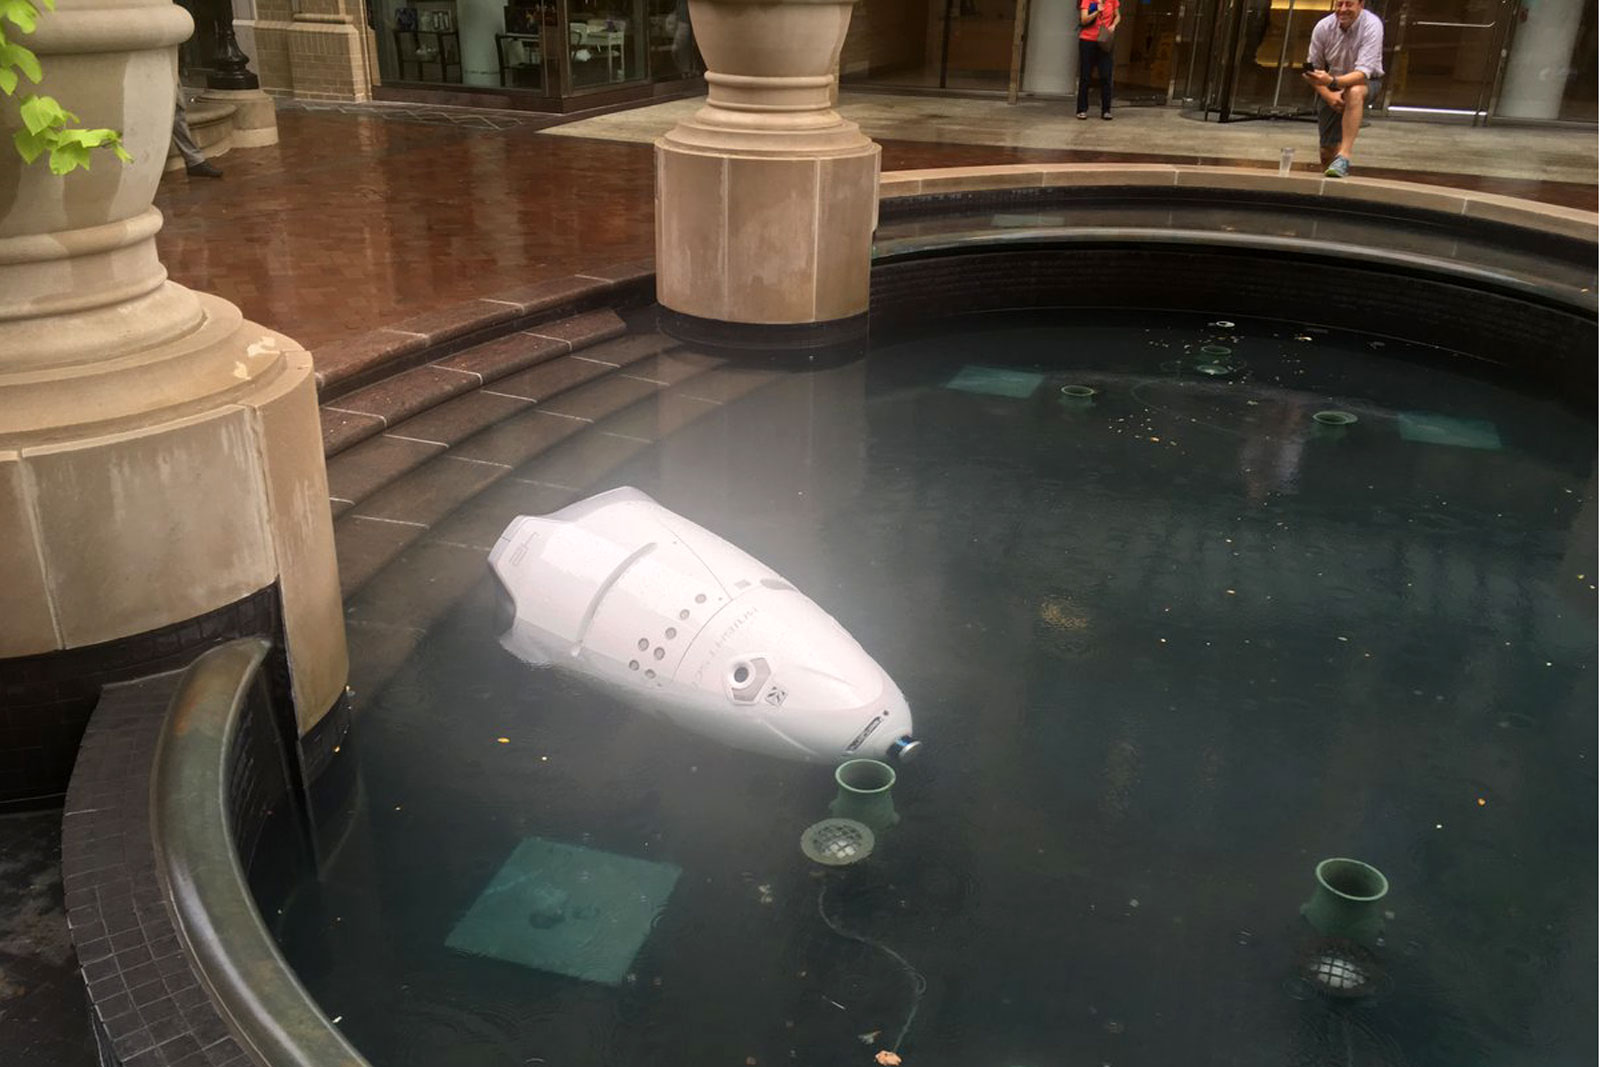 photo of Here's what happened when that security robot drowned image